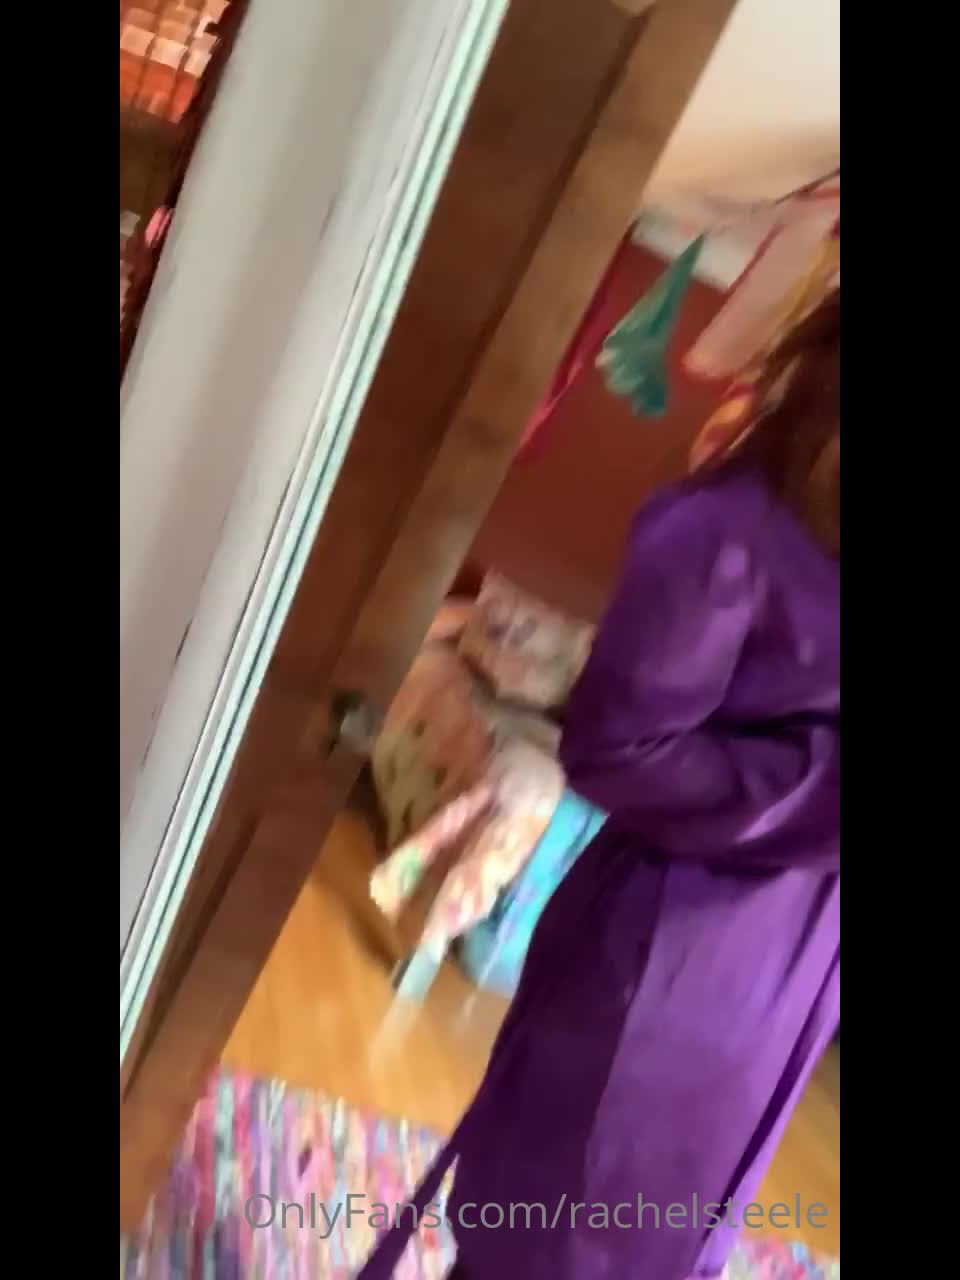 Rachel Steele Rachelsteele - do you think mommys purple robe would be enough to reach the target 20-05-2021